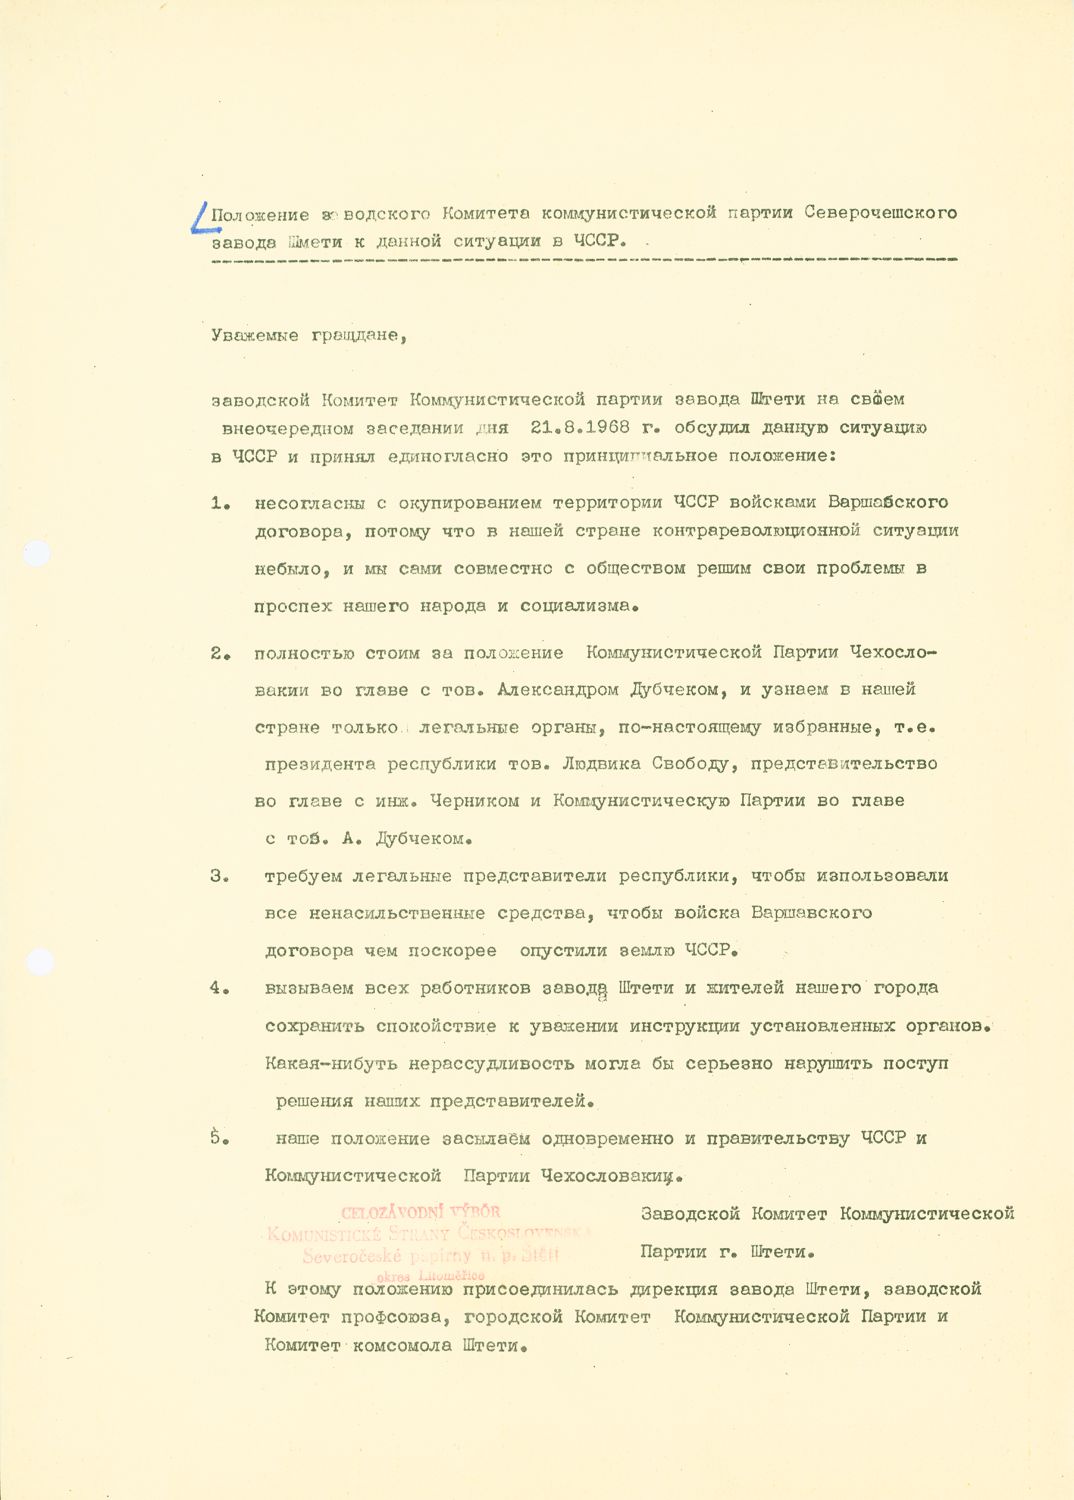 Statement of a Factory Workers' Council in Štětí